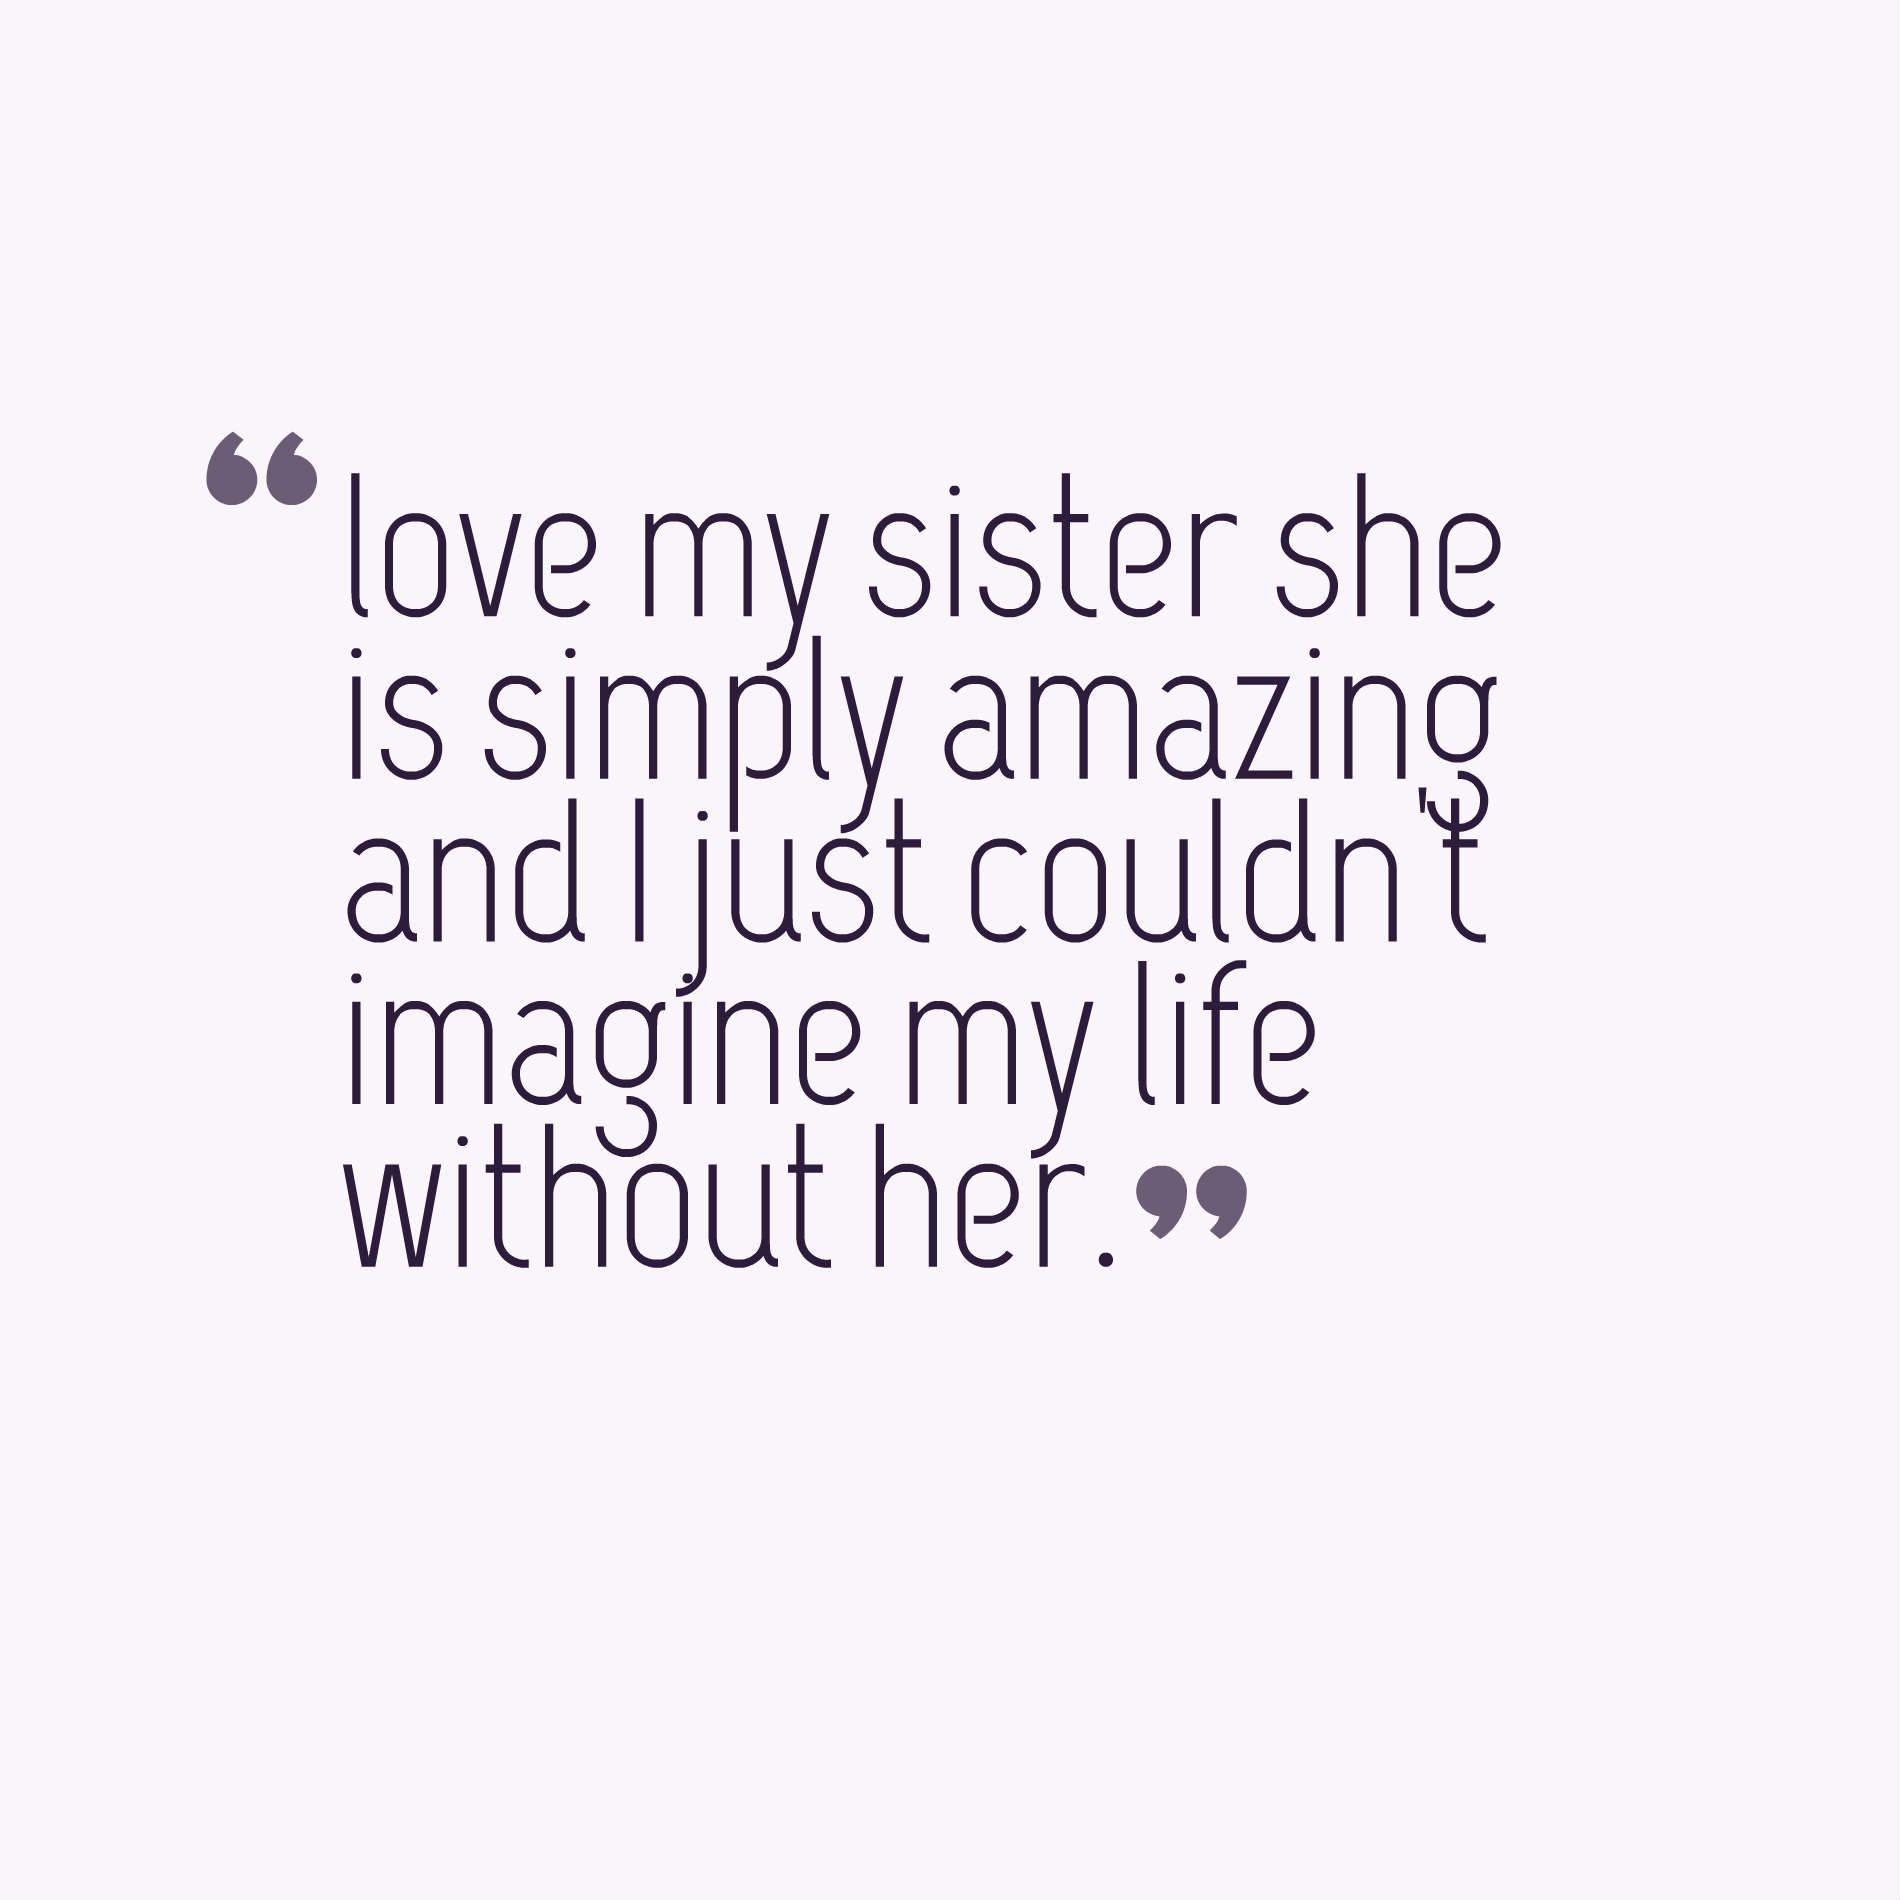 love my sister she is simply amazing and I just couldn't imagine my life without her.